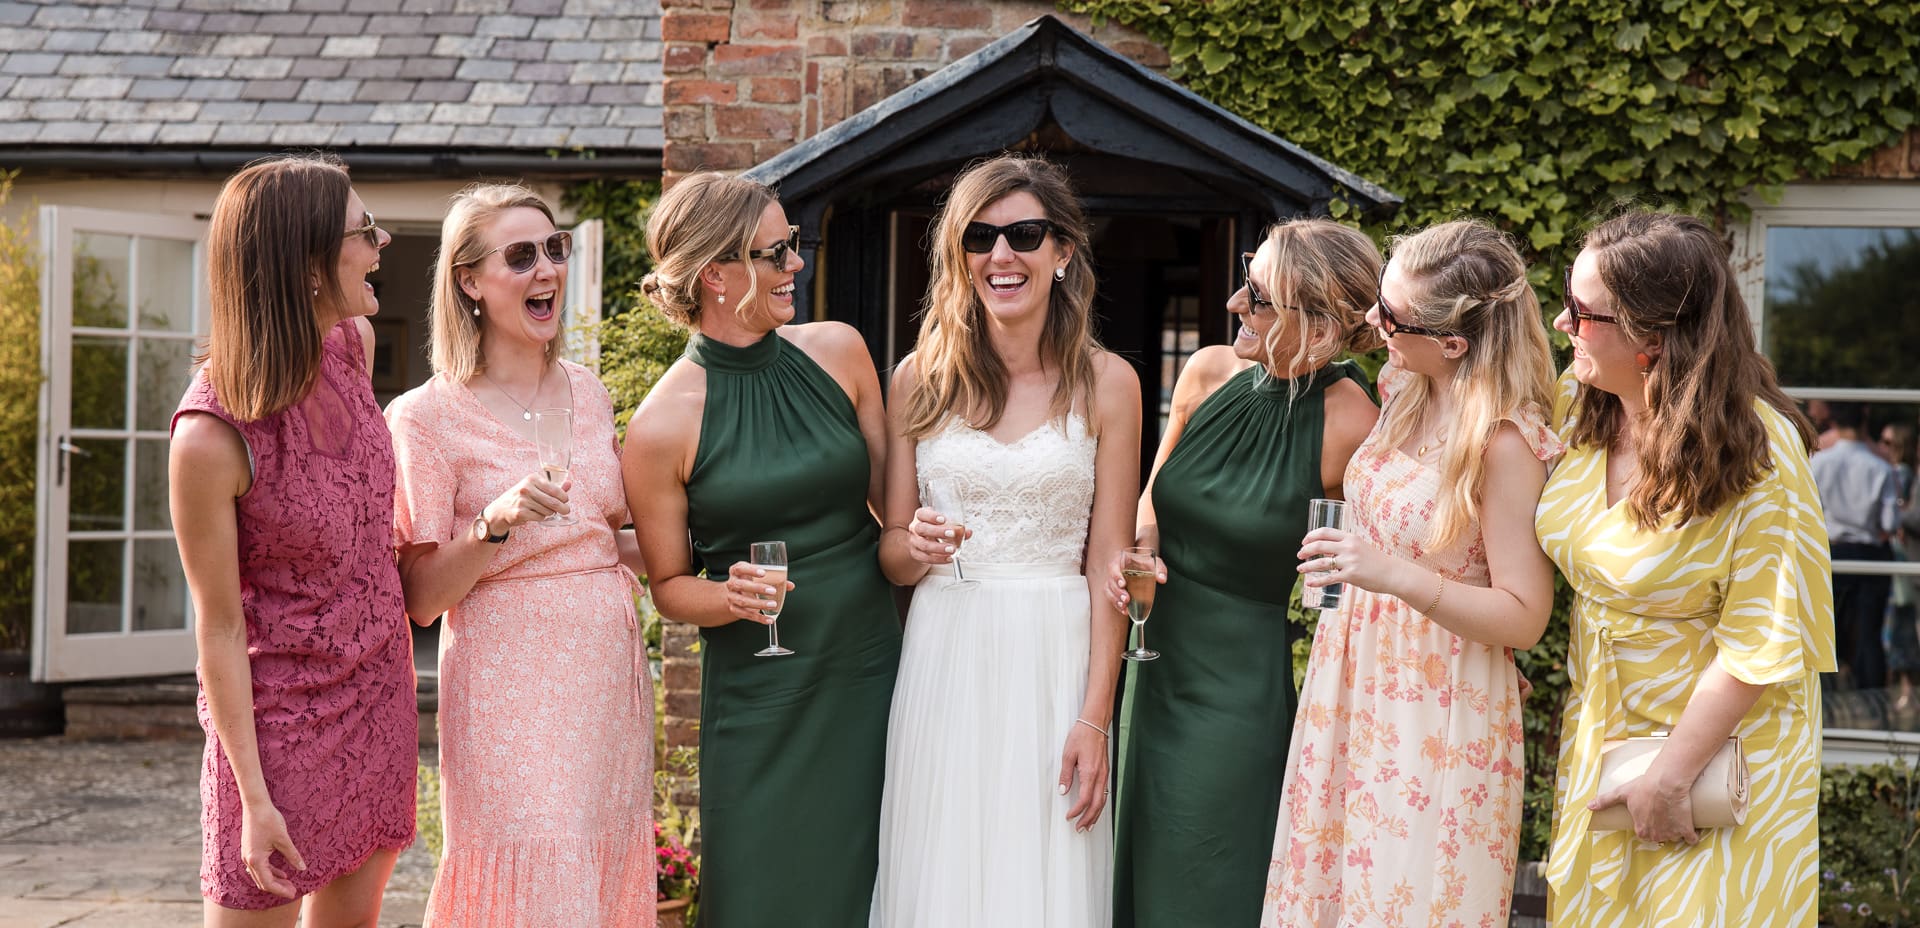 The Bride in shades with all her best girlfriends.